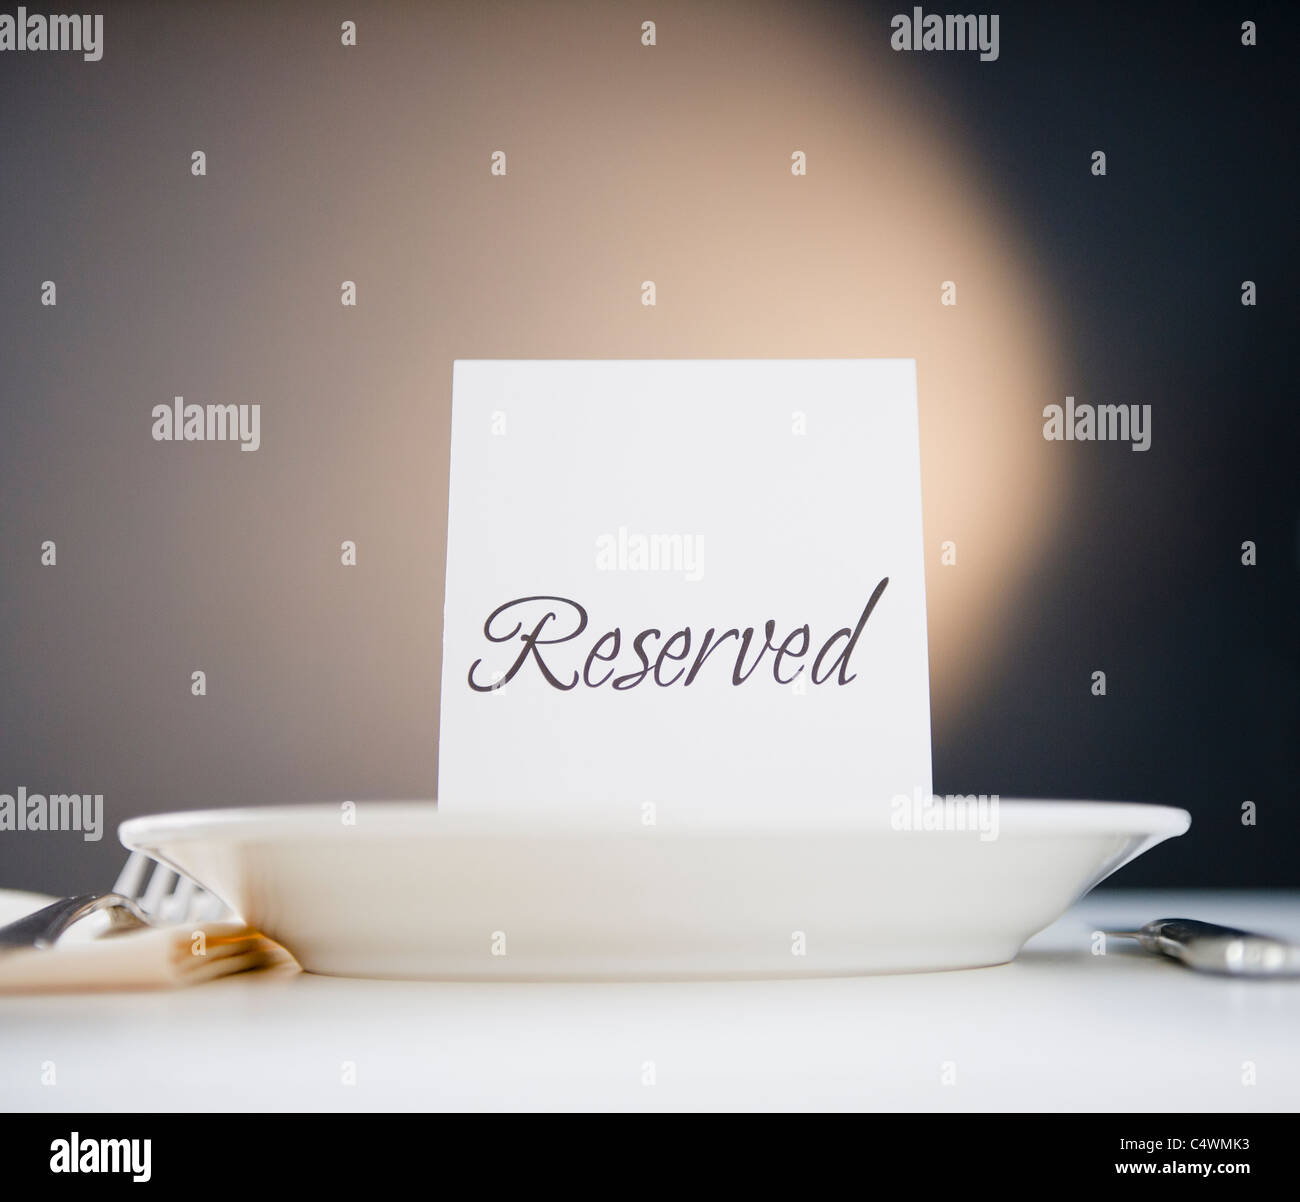 Reserved sign on place setting, studio shot Stock Photo